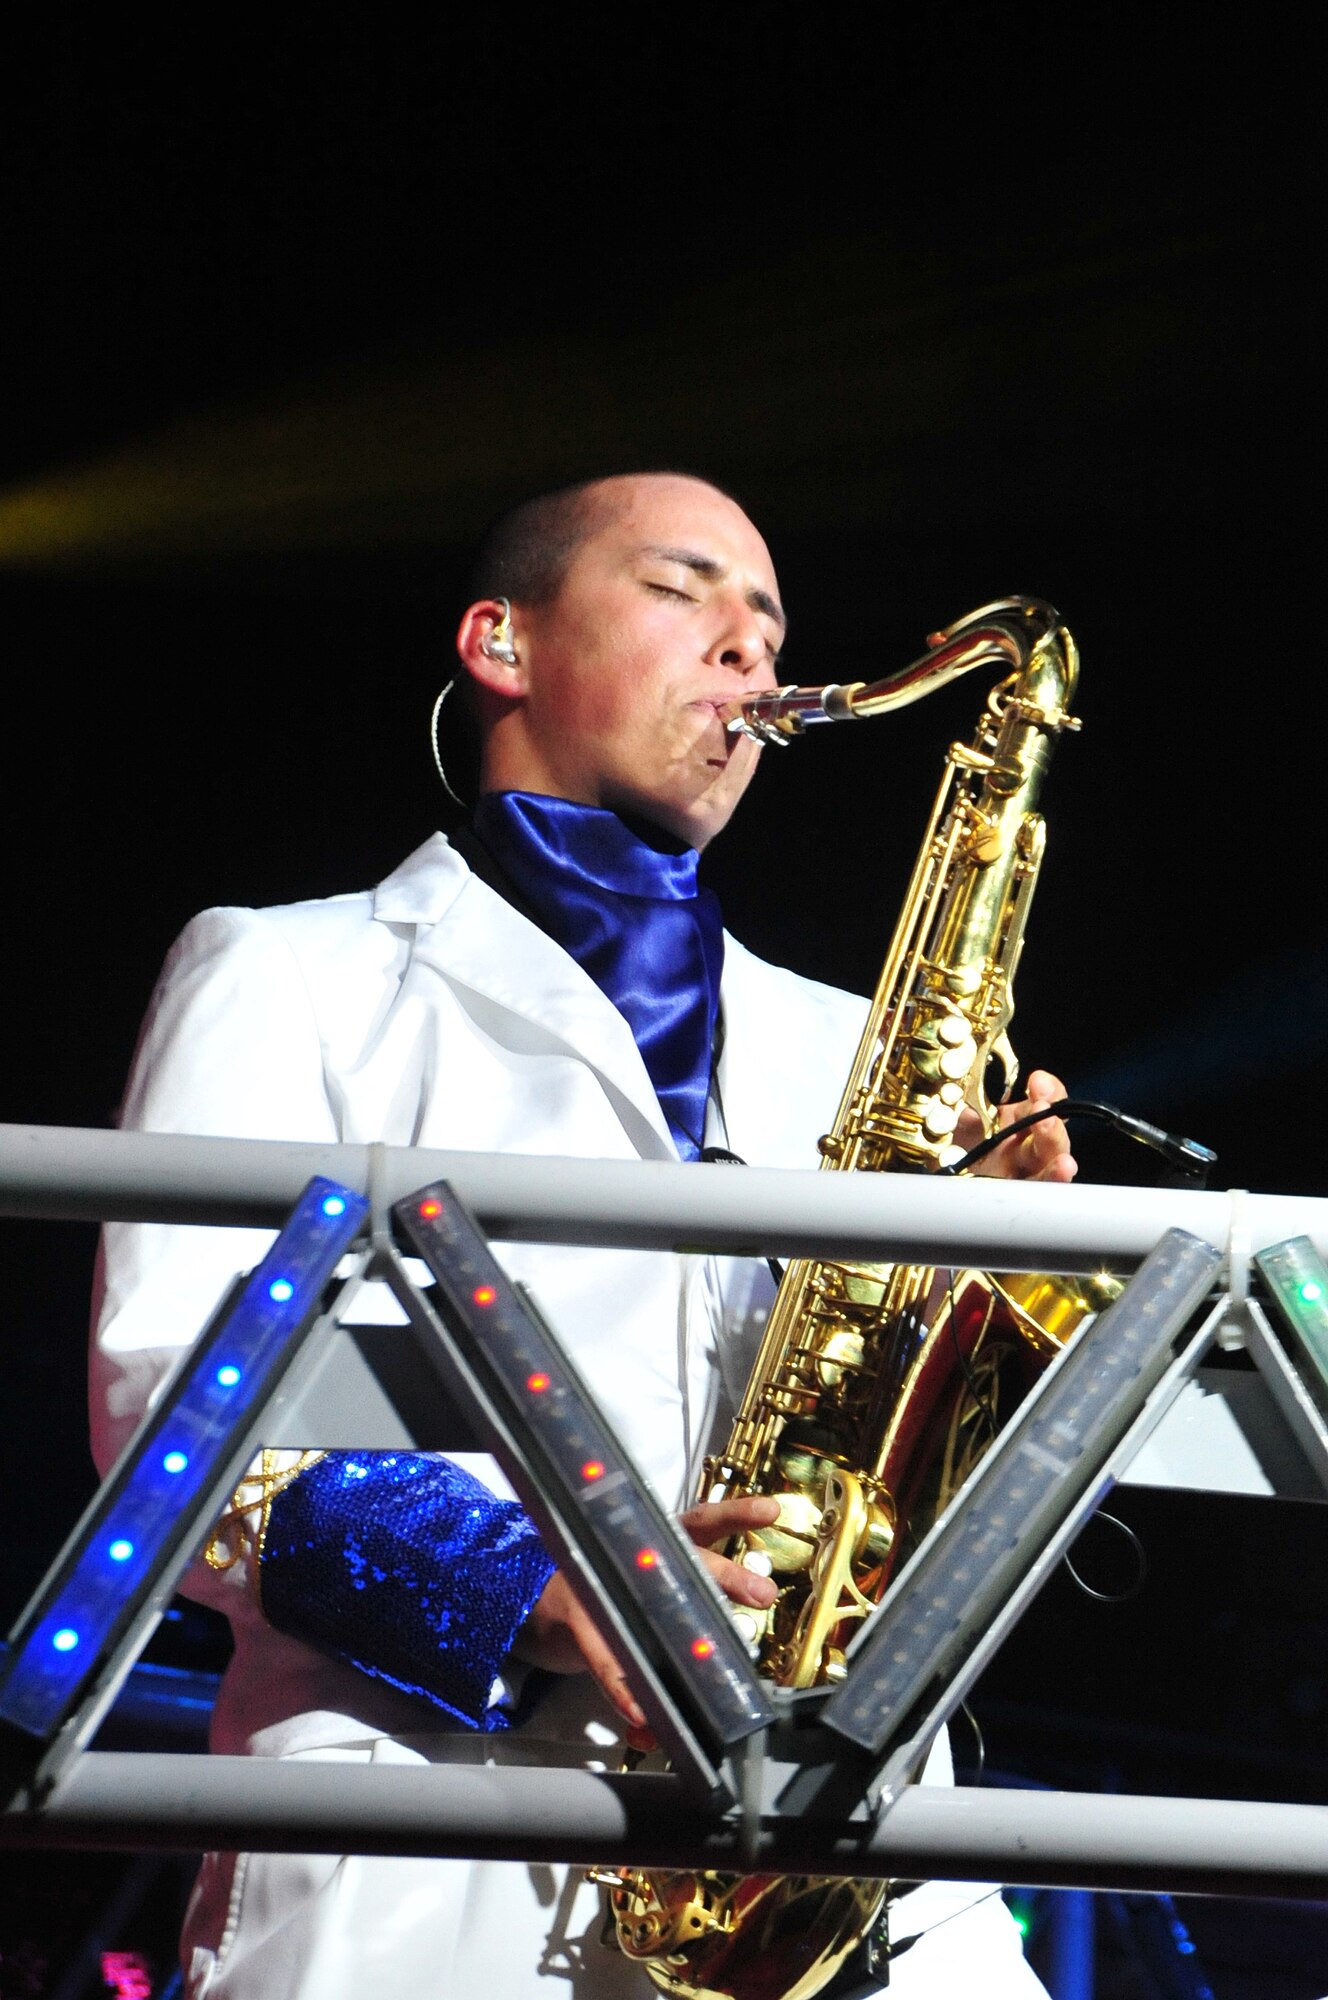 U.S. Air Force Airman 1st Class Ryan Ratkowski of the 341st Civil Engineer Squadron at Malmstrom Air Force Base, Mont., performs a saxophone solo at the Tops in Blue 2011 world tour at the Omaha Music Hall in Omaha, Neb., on July 6. The tour this year is themed "Rhythm Nation" and features songs from the past and present that helped shape our country's history. (U.S. Air Force Photo by D.P. Heard/Released)